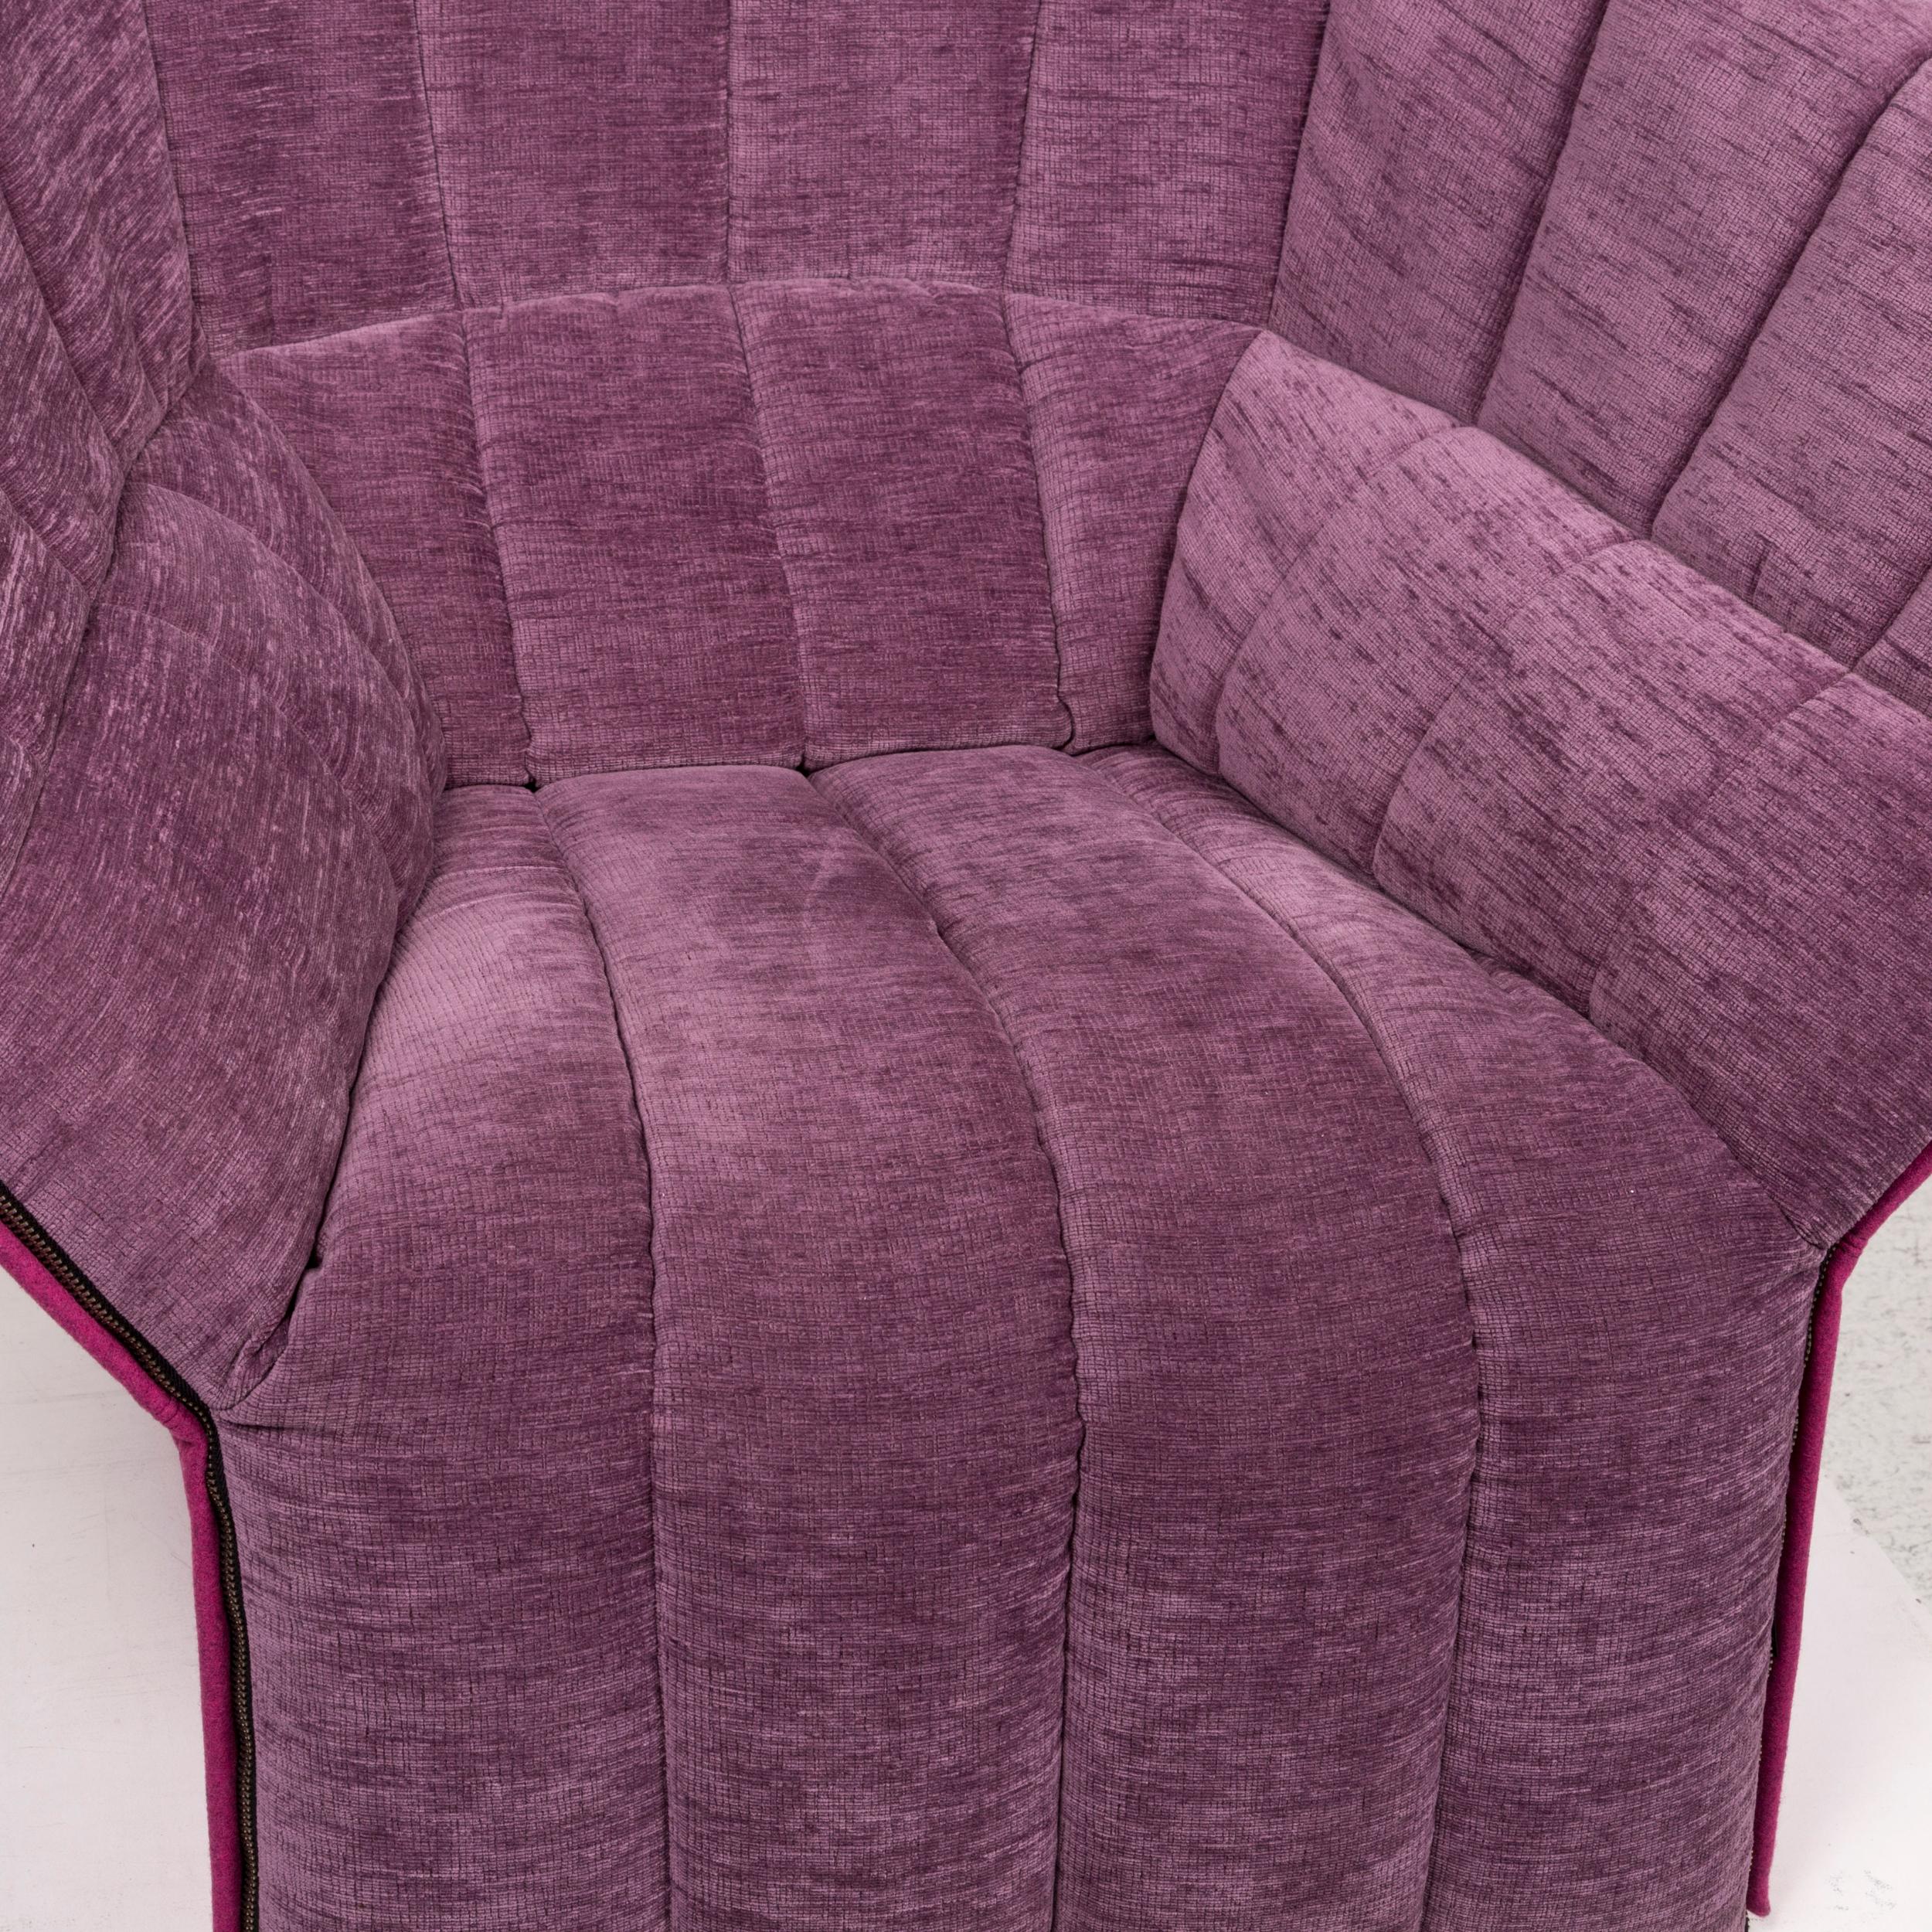 We bring to you a Ligne Roset fabric armchair set purple 2x armchair 1x stool.
   
 

 Product measurements in centimeters:
 

Depth 85
Width 120
Height 97
Seat-height 39
Rest-height 76
Seat-depth 54
Seat-width 45
Back-height 61.